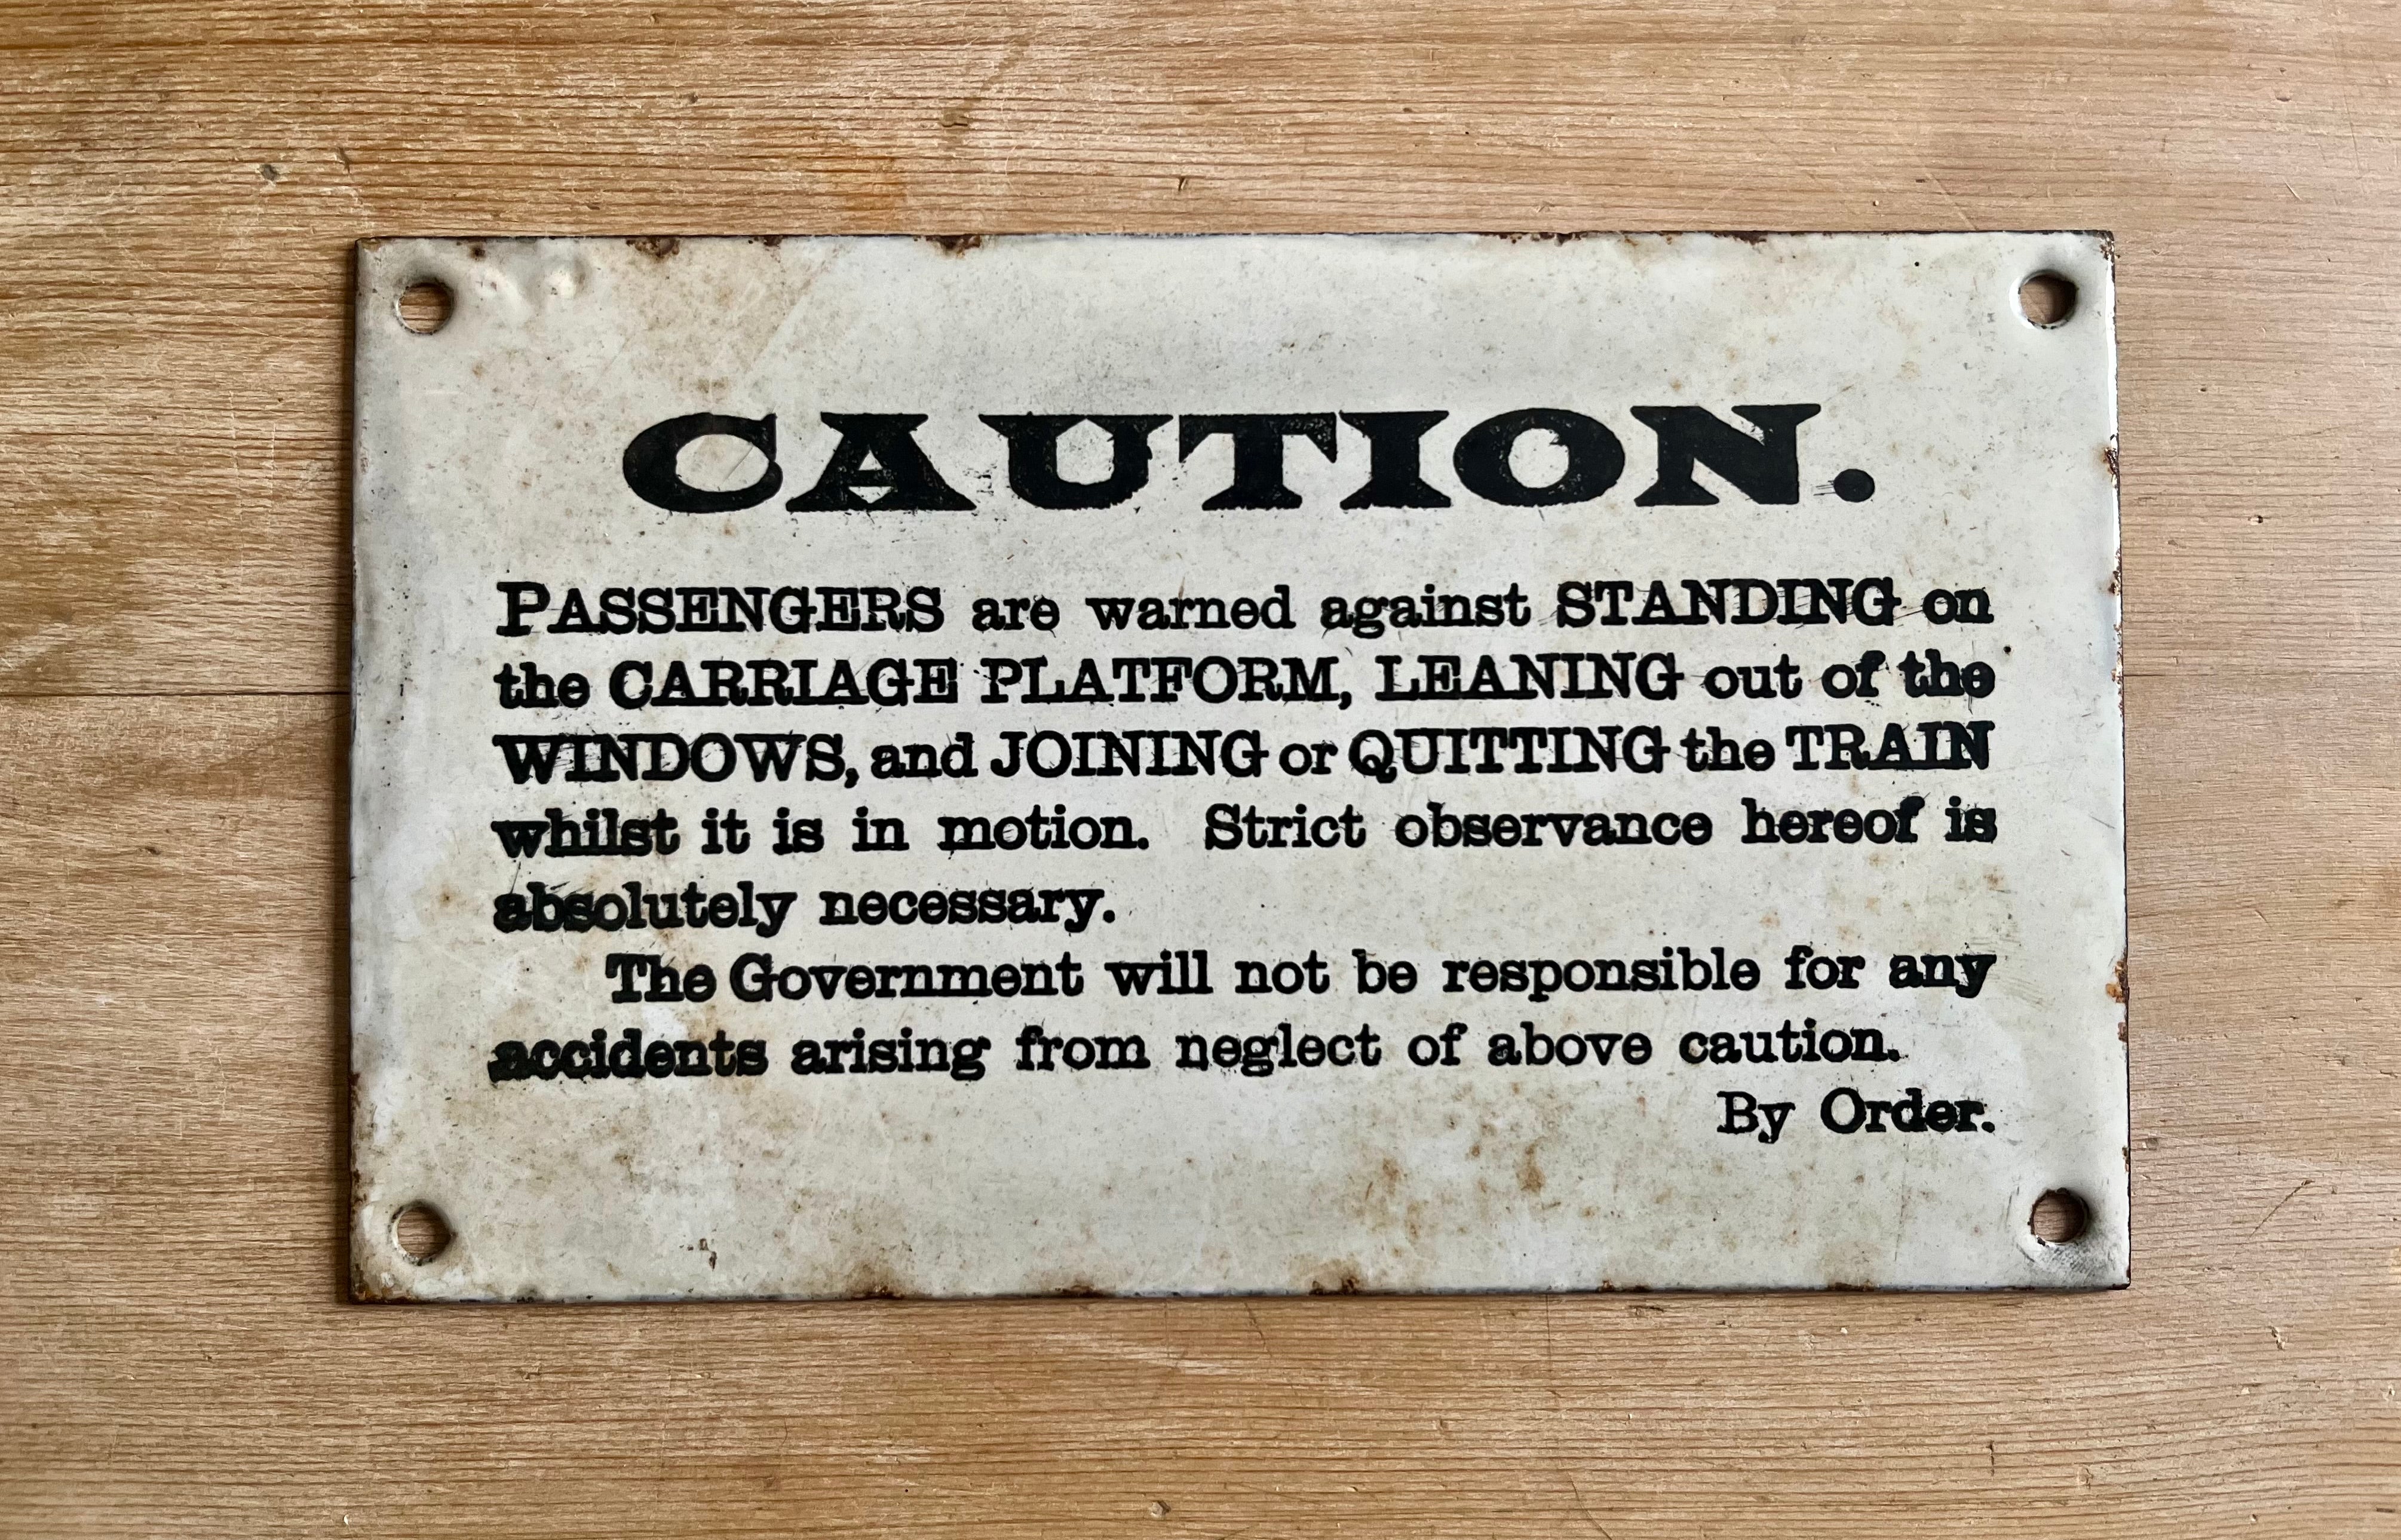 Original enamel railway sign warning passengers against standing on the carriage running boards, leaning out of windows or attempting to join or quit the train in motion